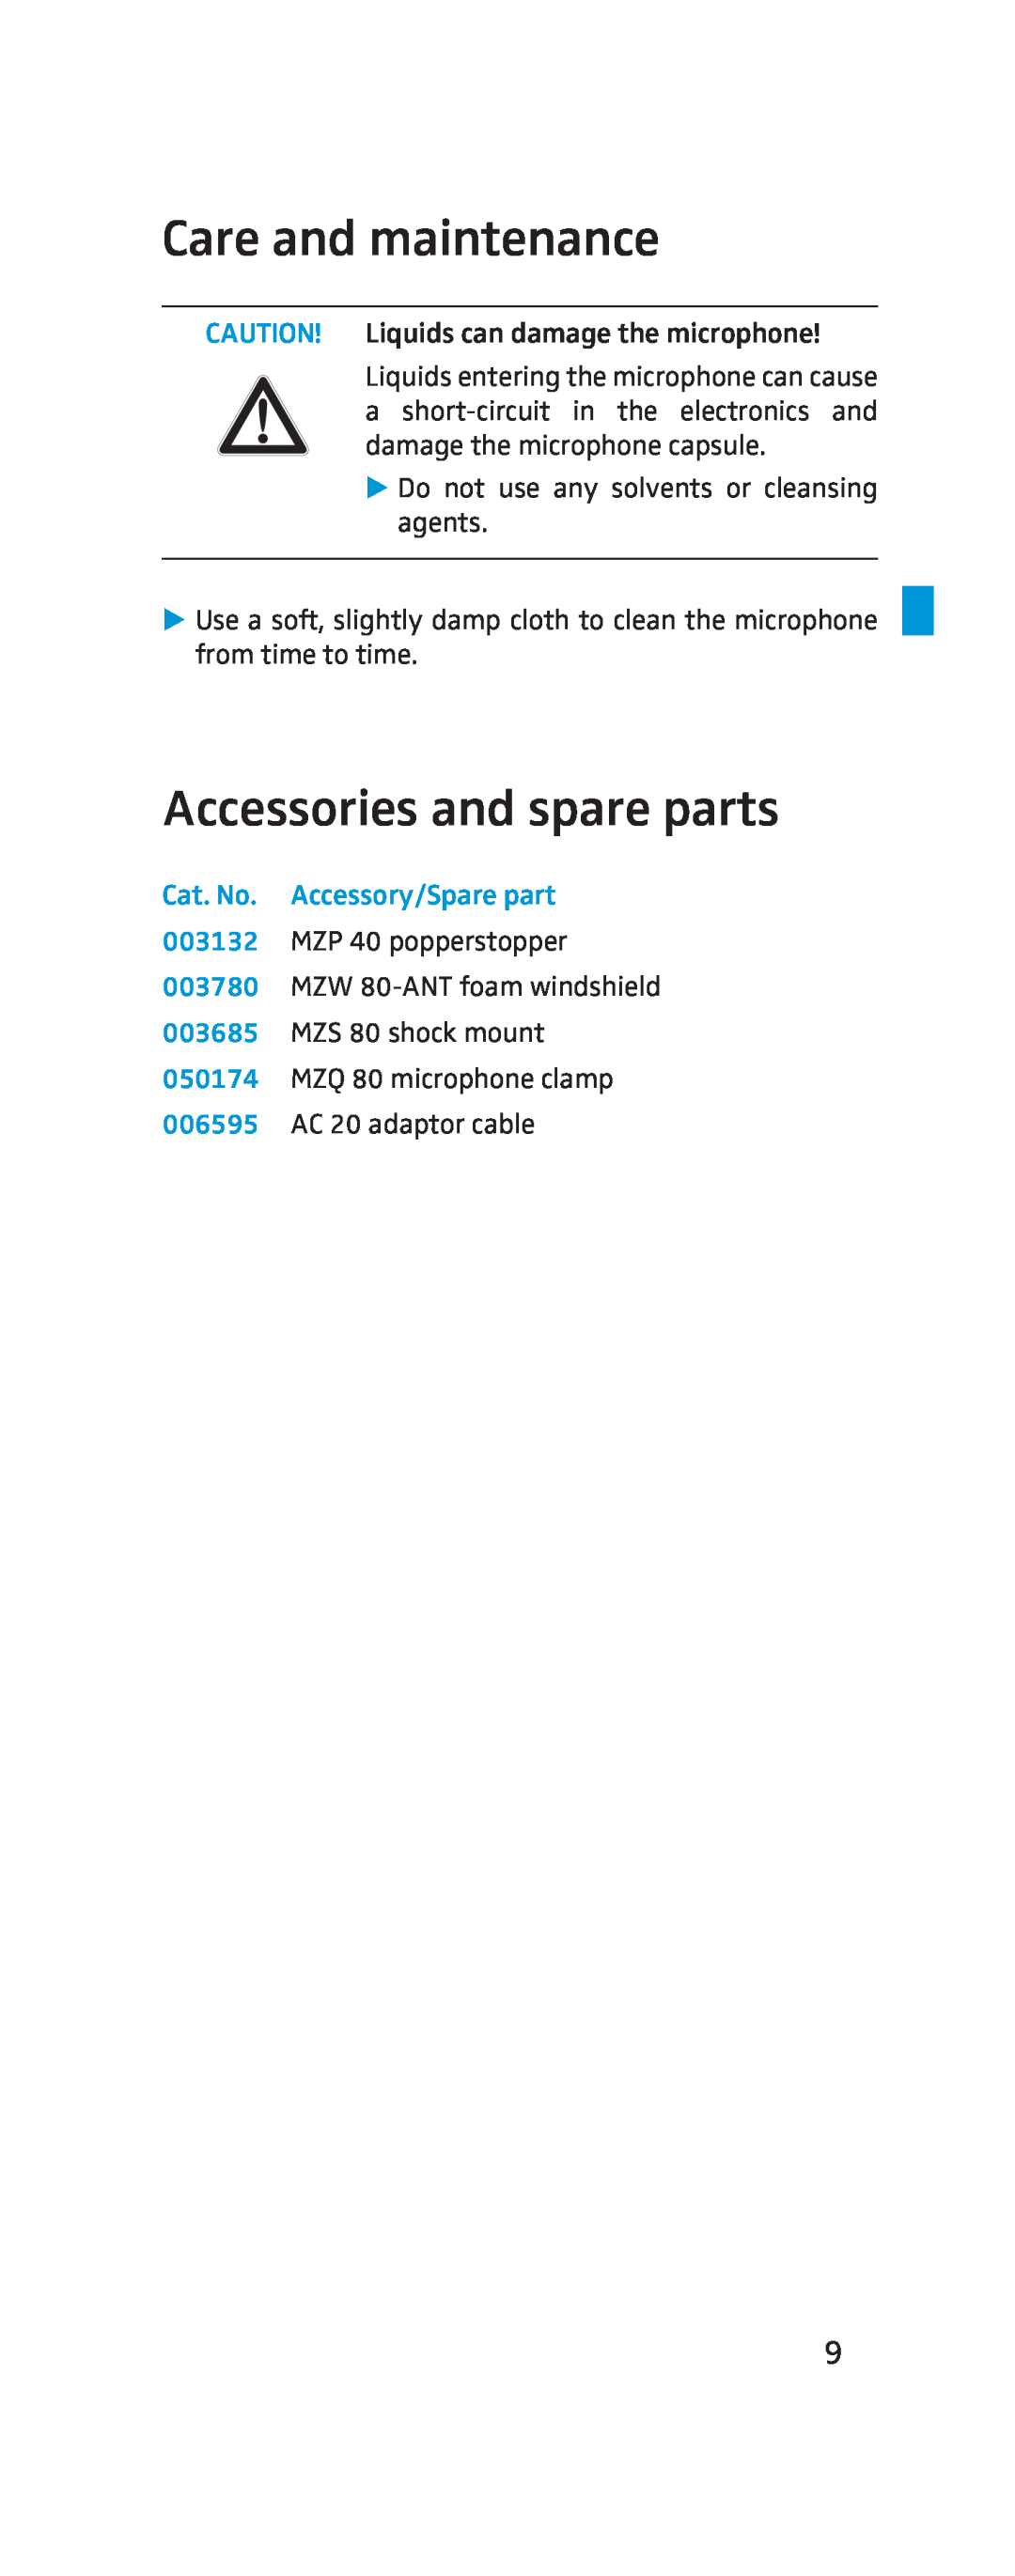 Sennheiser MKH-800 manual Care and maintenance, Accessories and spare parts, Cat. No. Accessory/Spare part 